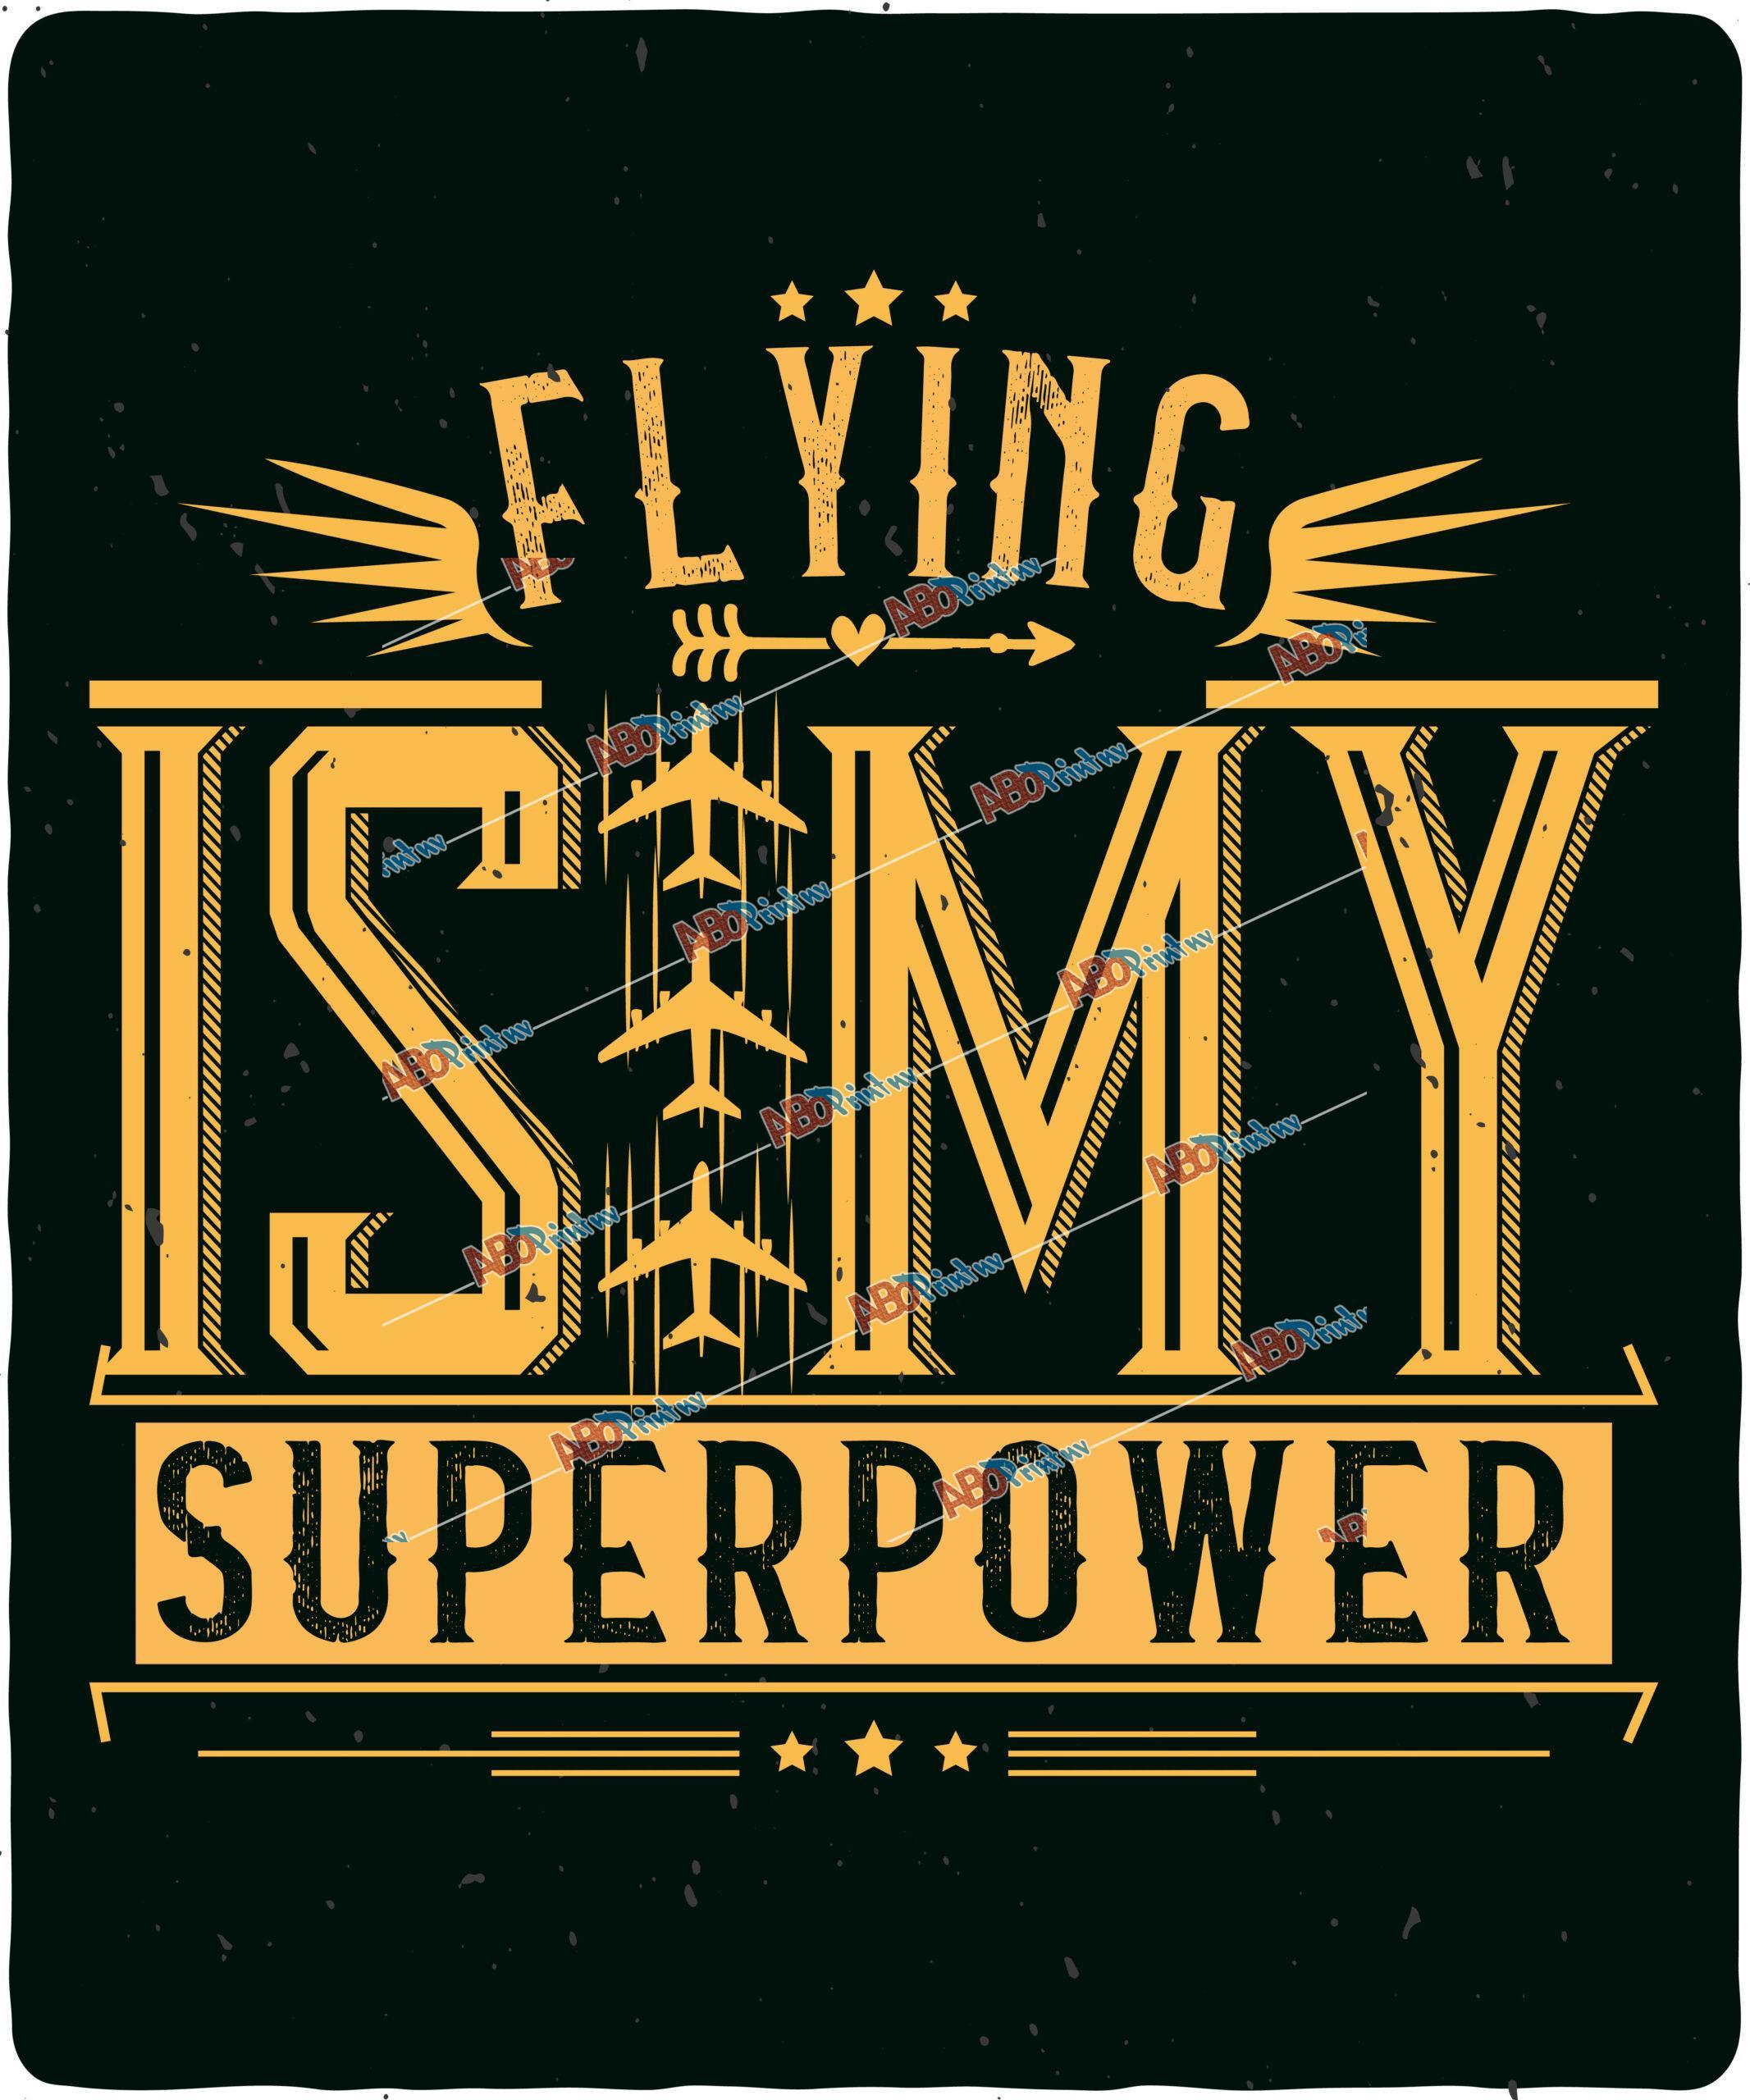 Flying is my superpower